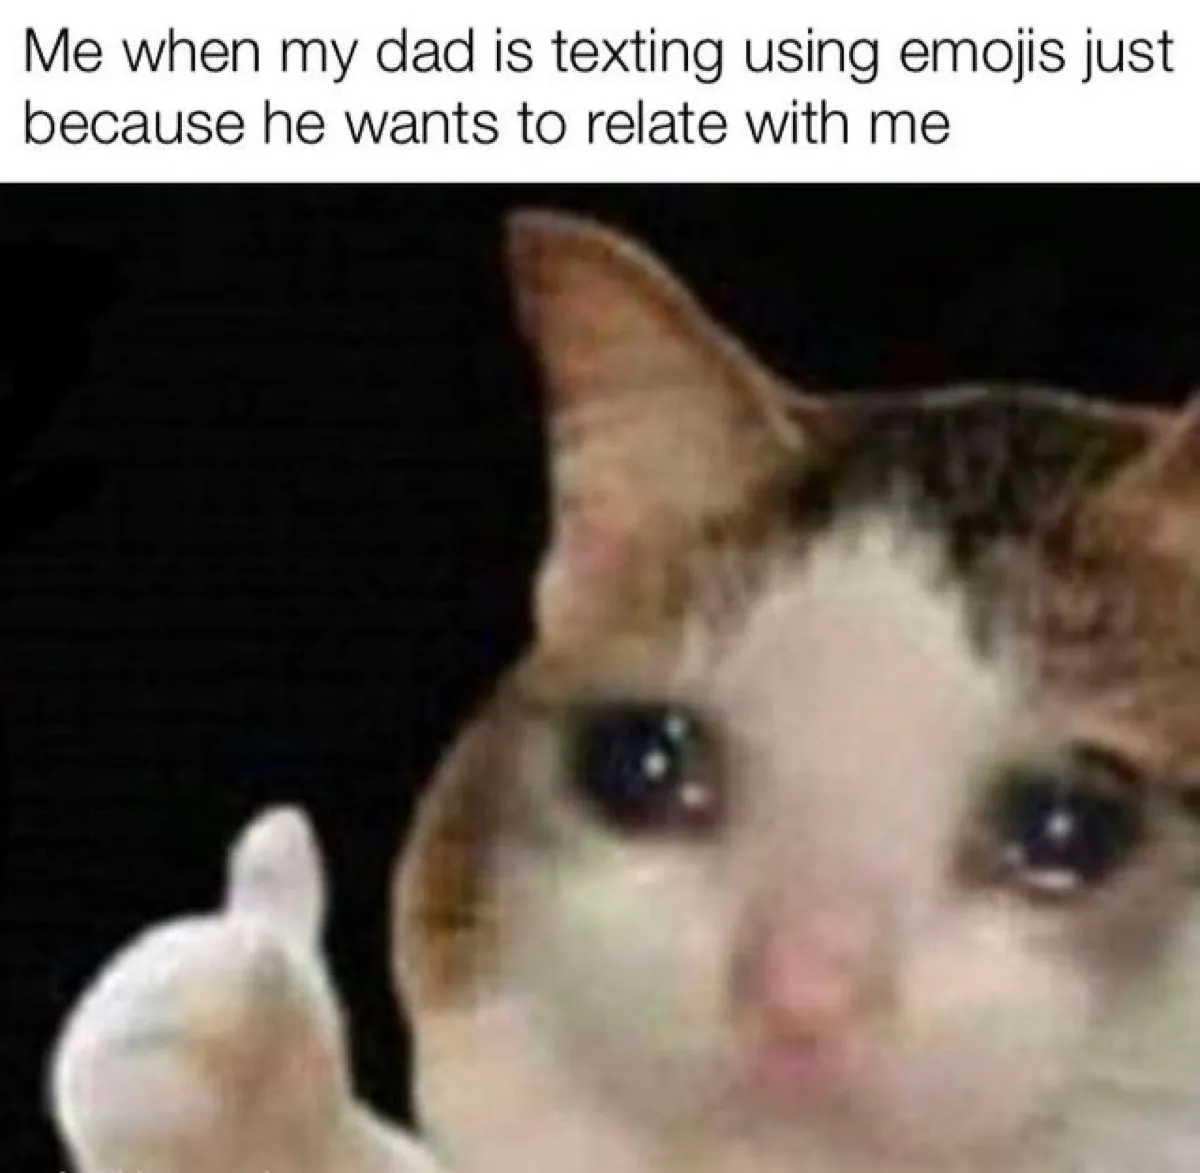 Crying cat meme with the caption, "Me when my dad is texting using emojis just because he wants to relate to me."